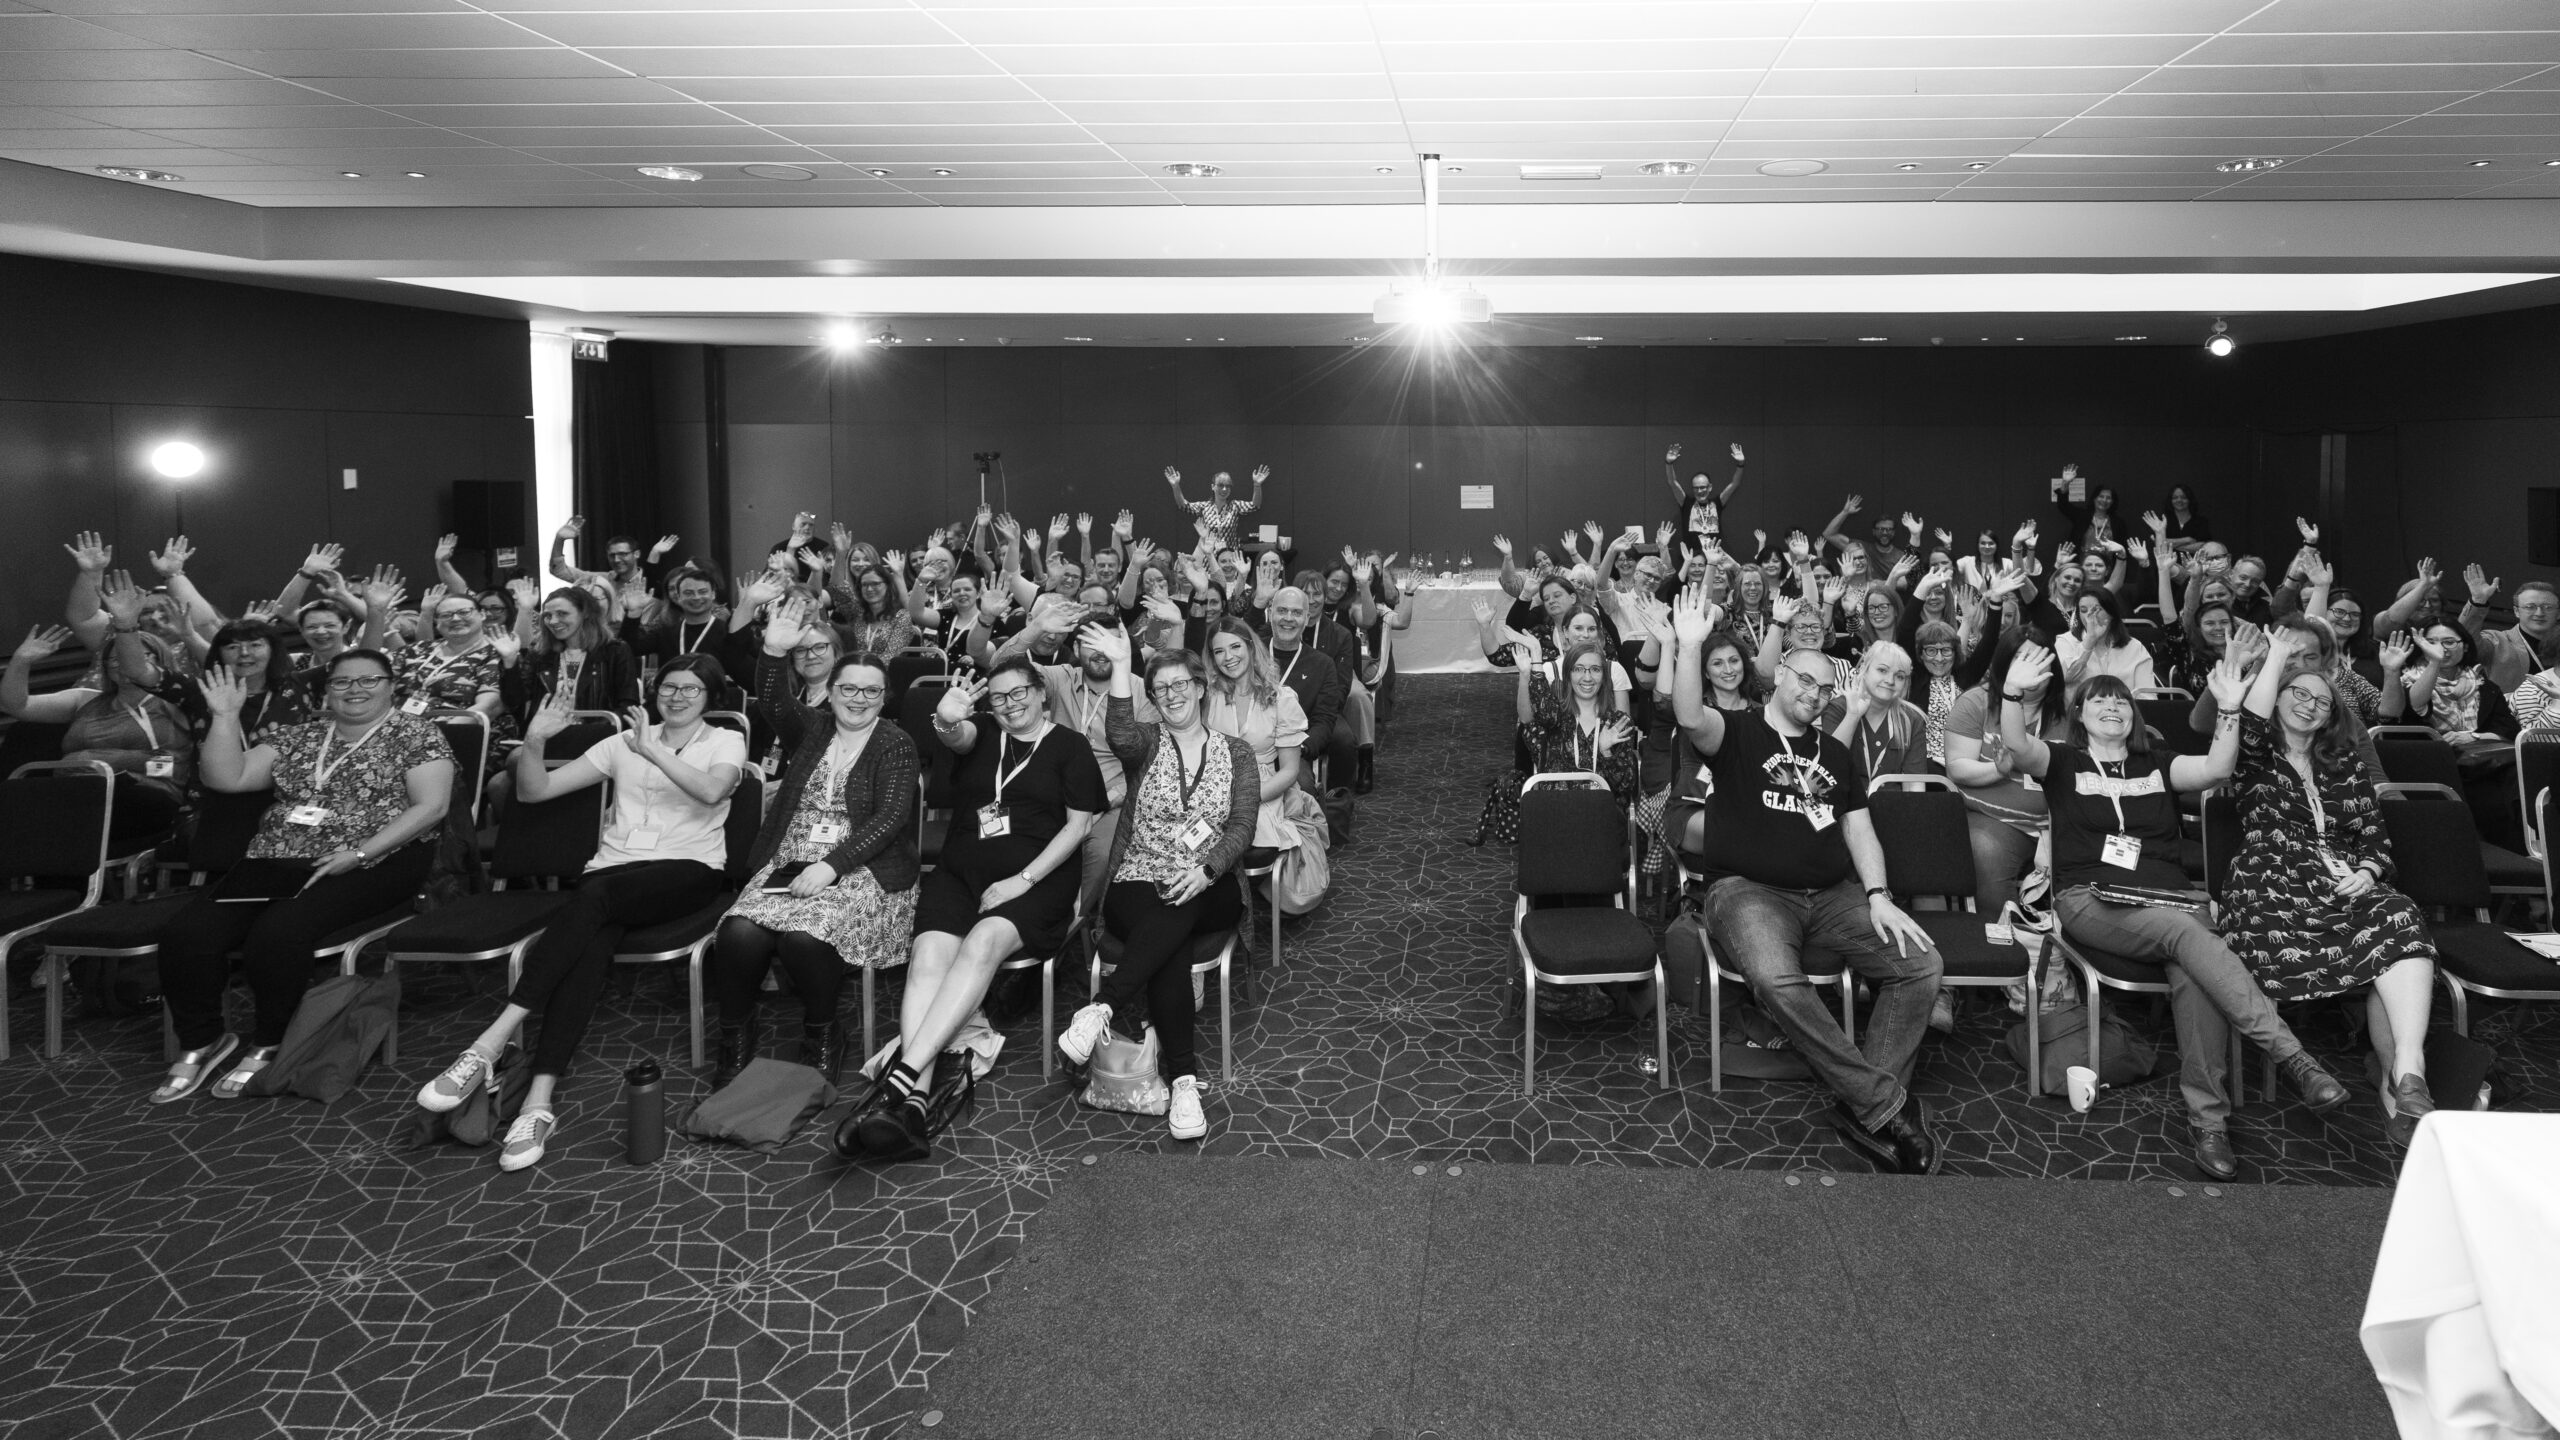 Black and white image of delegates at past CILIPS Conference in Dundee.